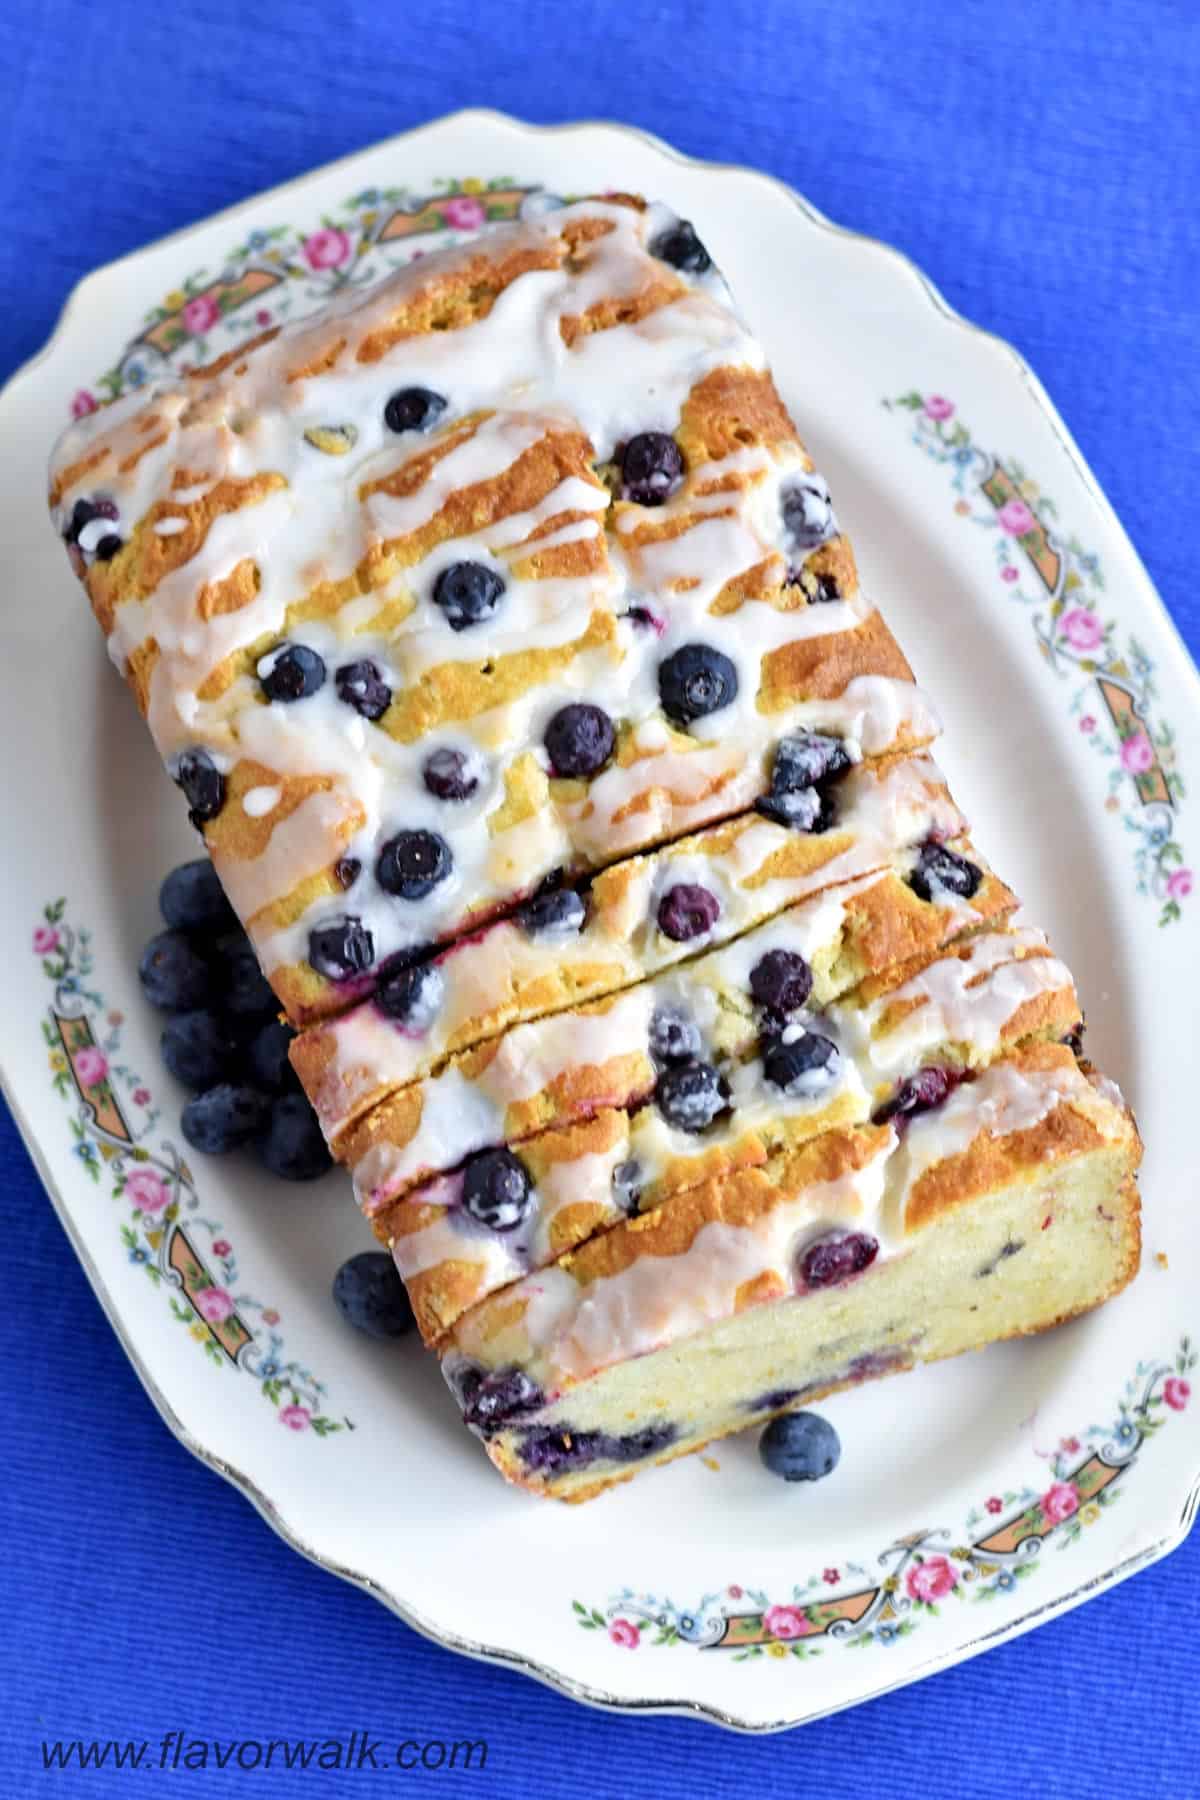 Overhead view of a sliced loaf of gluten free lemon blueberry bread on a serving plater.